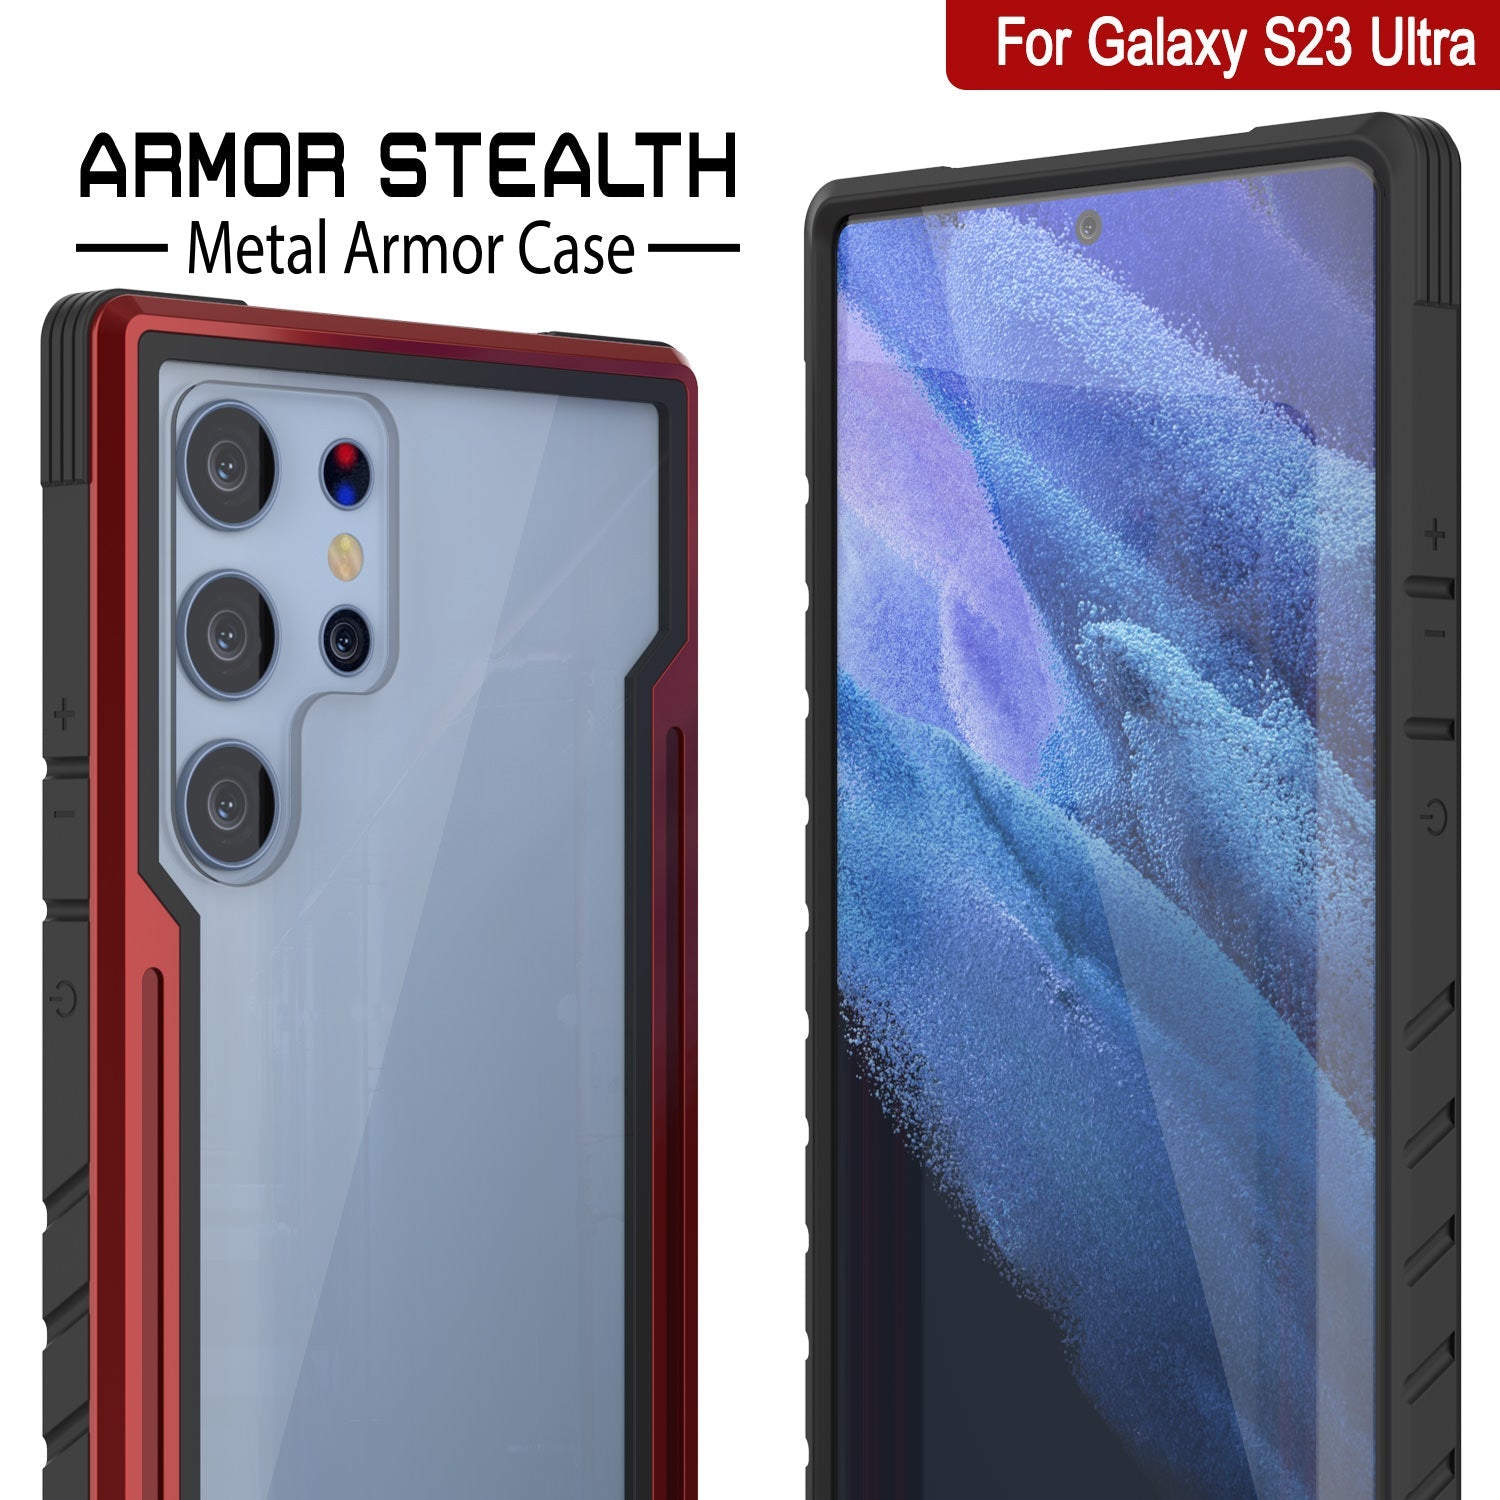 Punkcase S23 Ultra Armor Stealth Case Protective Military Grade Multilayer Cover [Red]